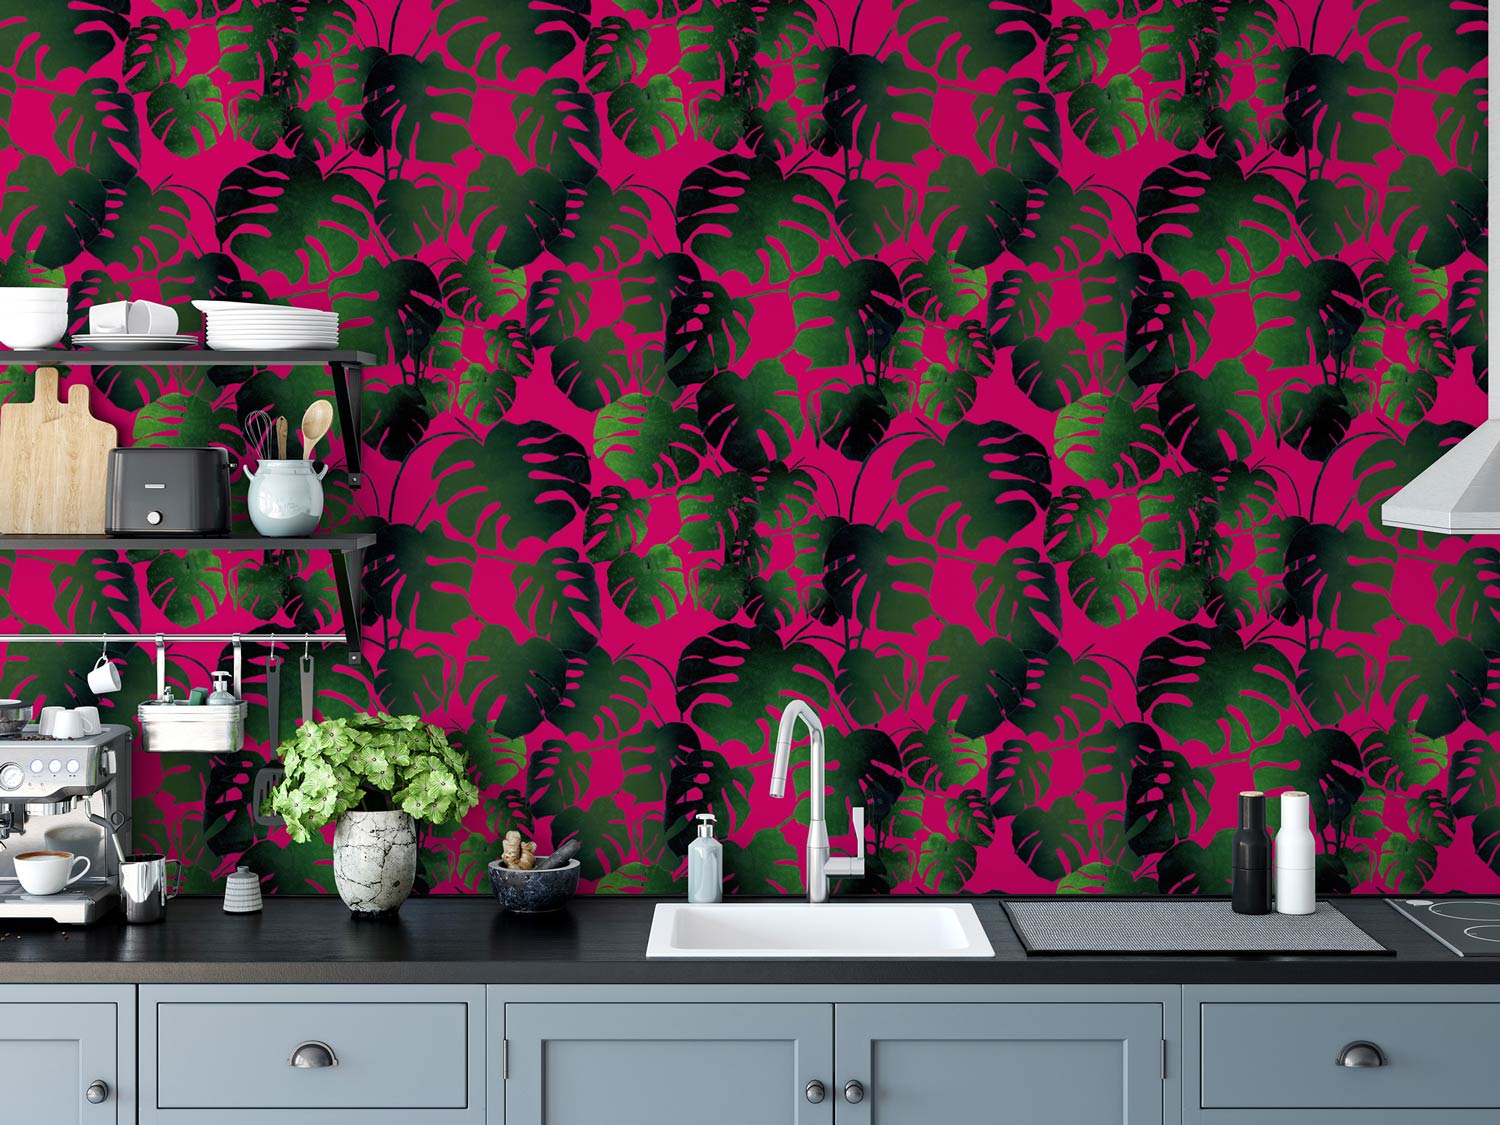 Cheese Plant Wallpaper - Bring the outdoors in with Naruse Design